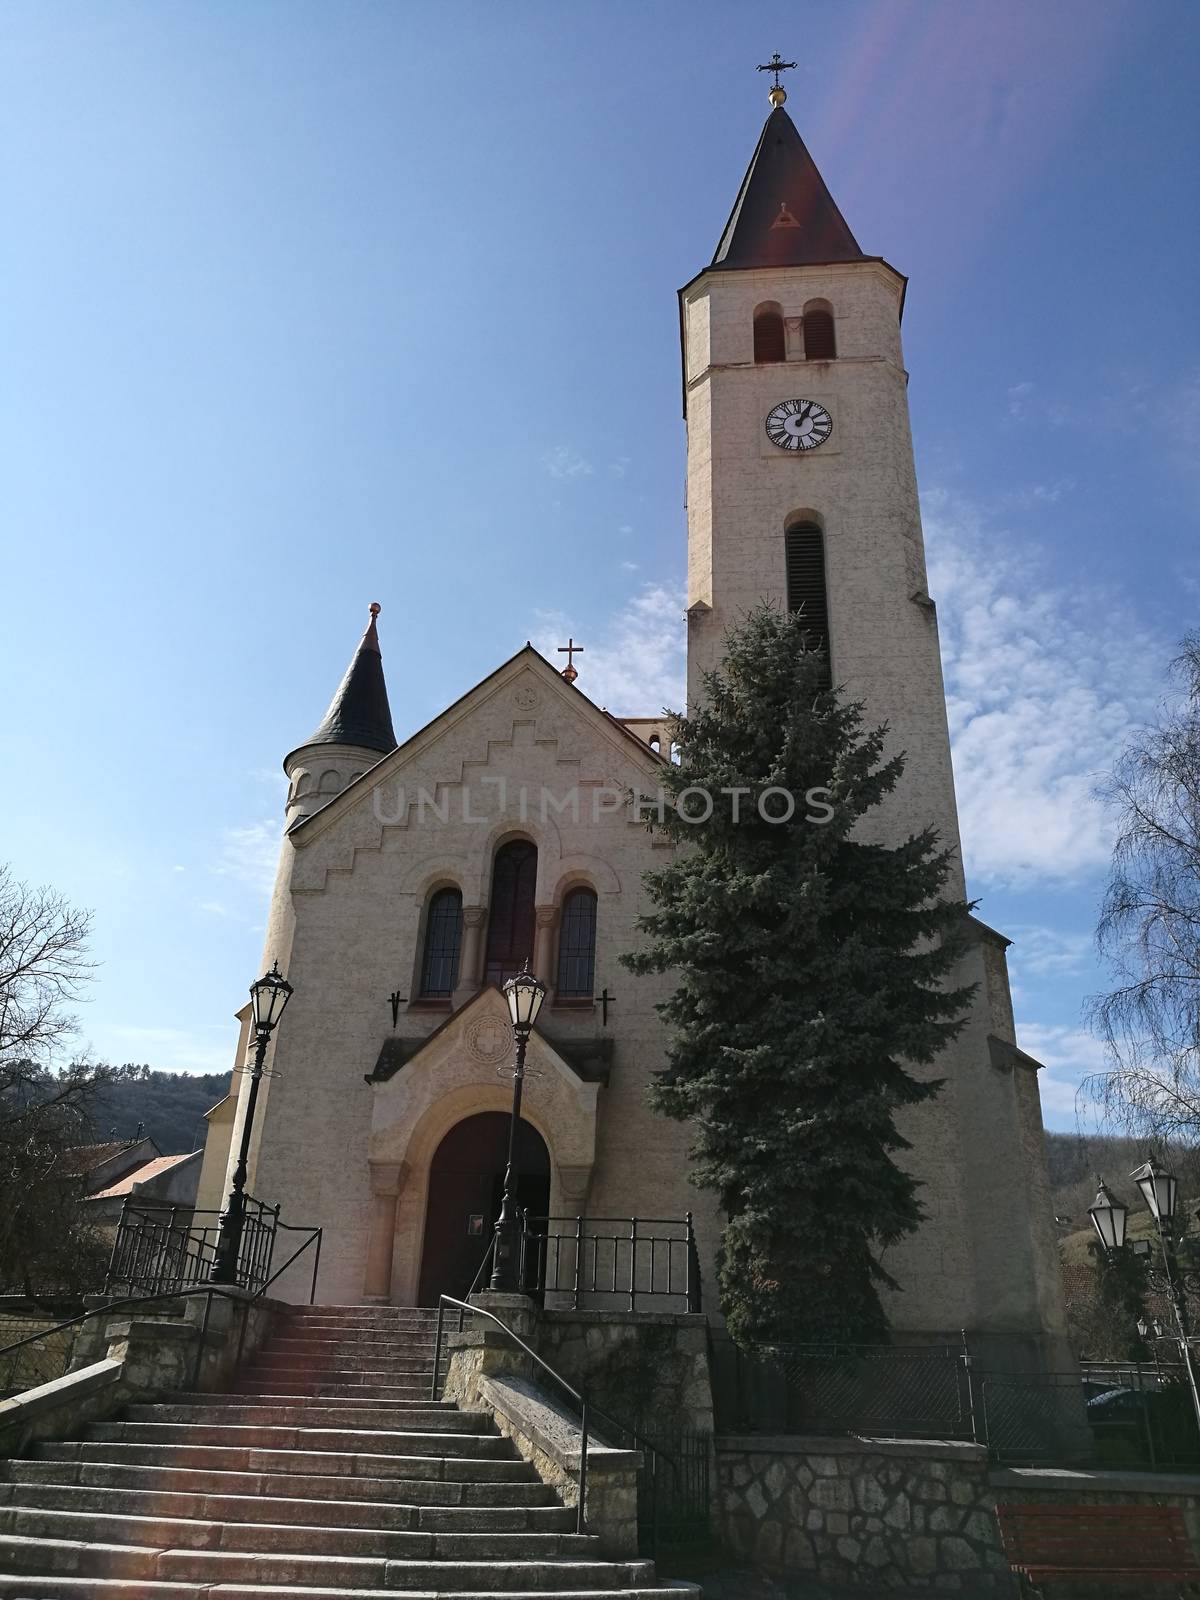 A church with a clock tower in front of a brick building. High quality photo